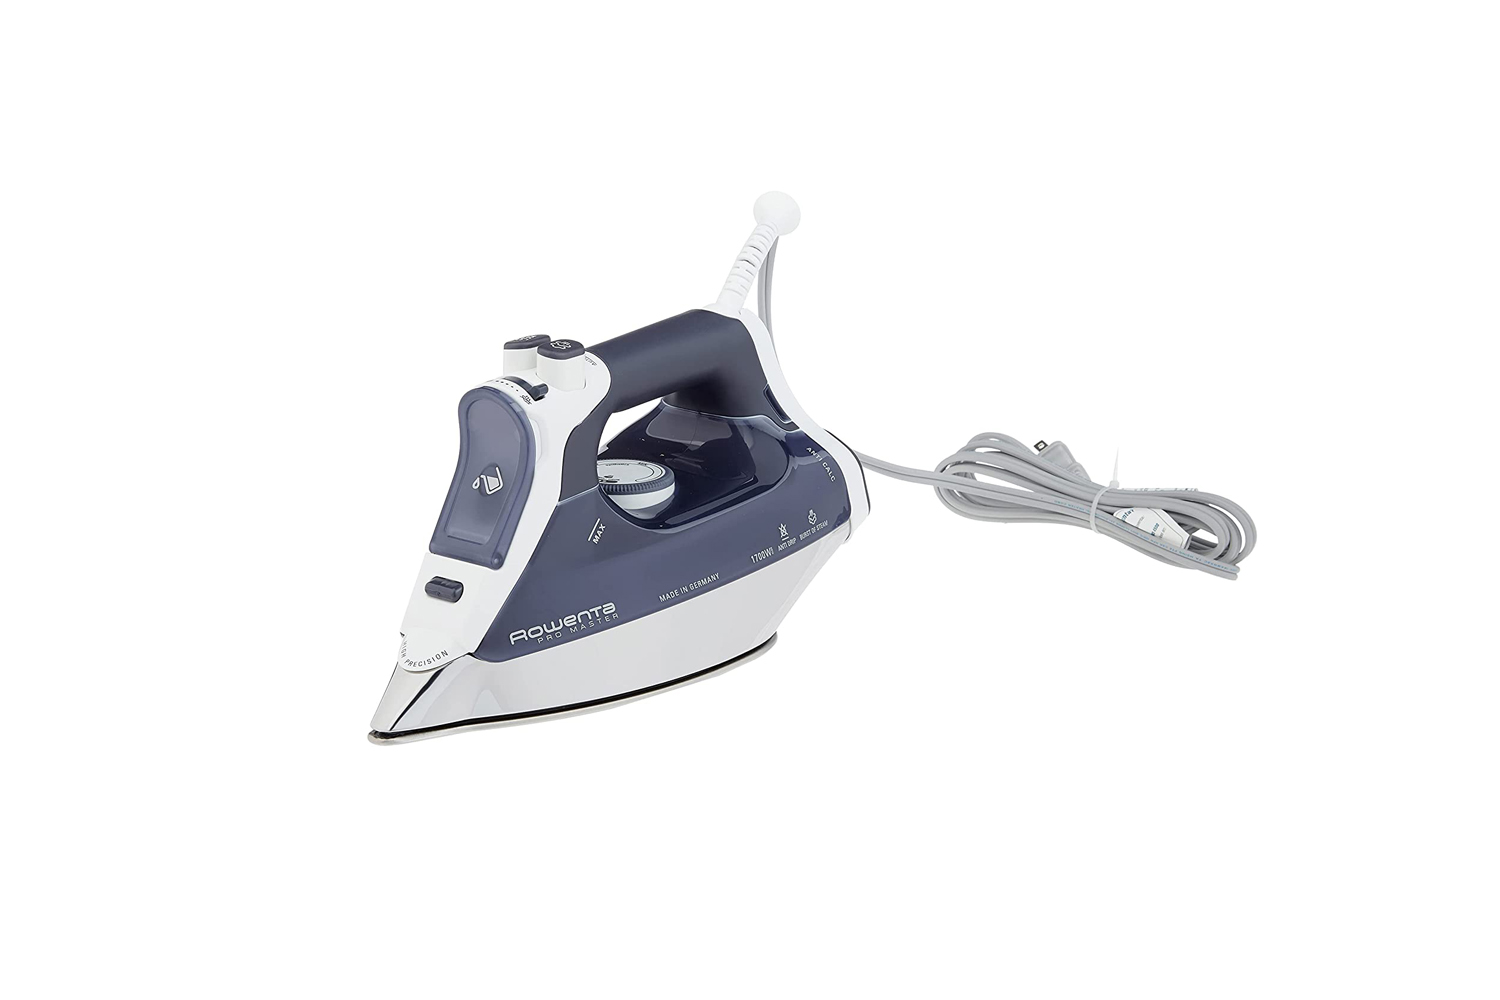 the rowenta professional micro steam iron stainless steel (dw8080) is $82.80  12